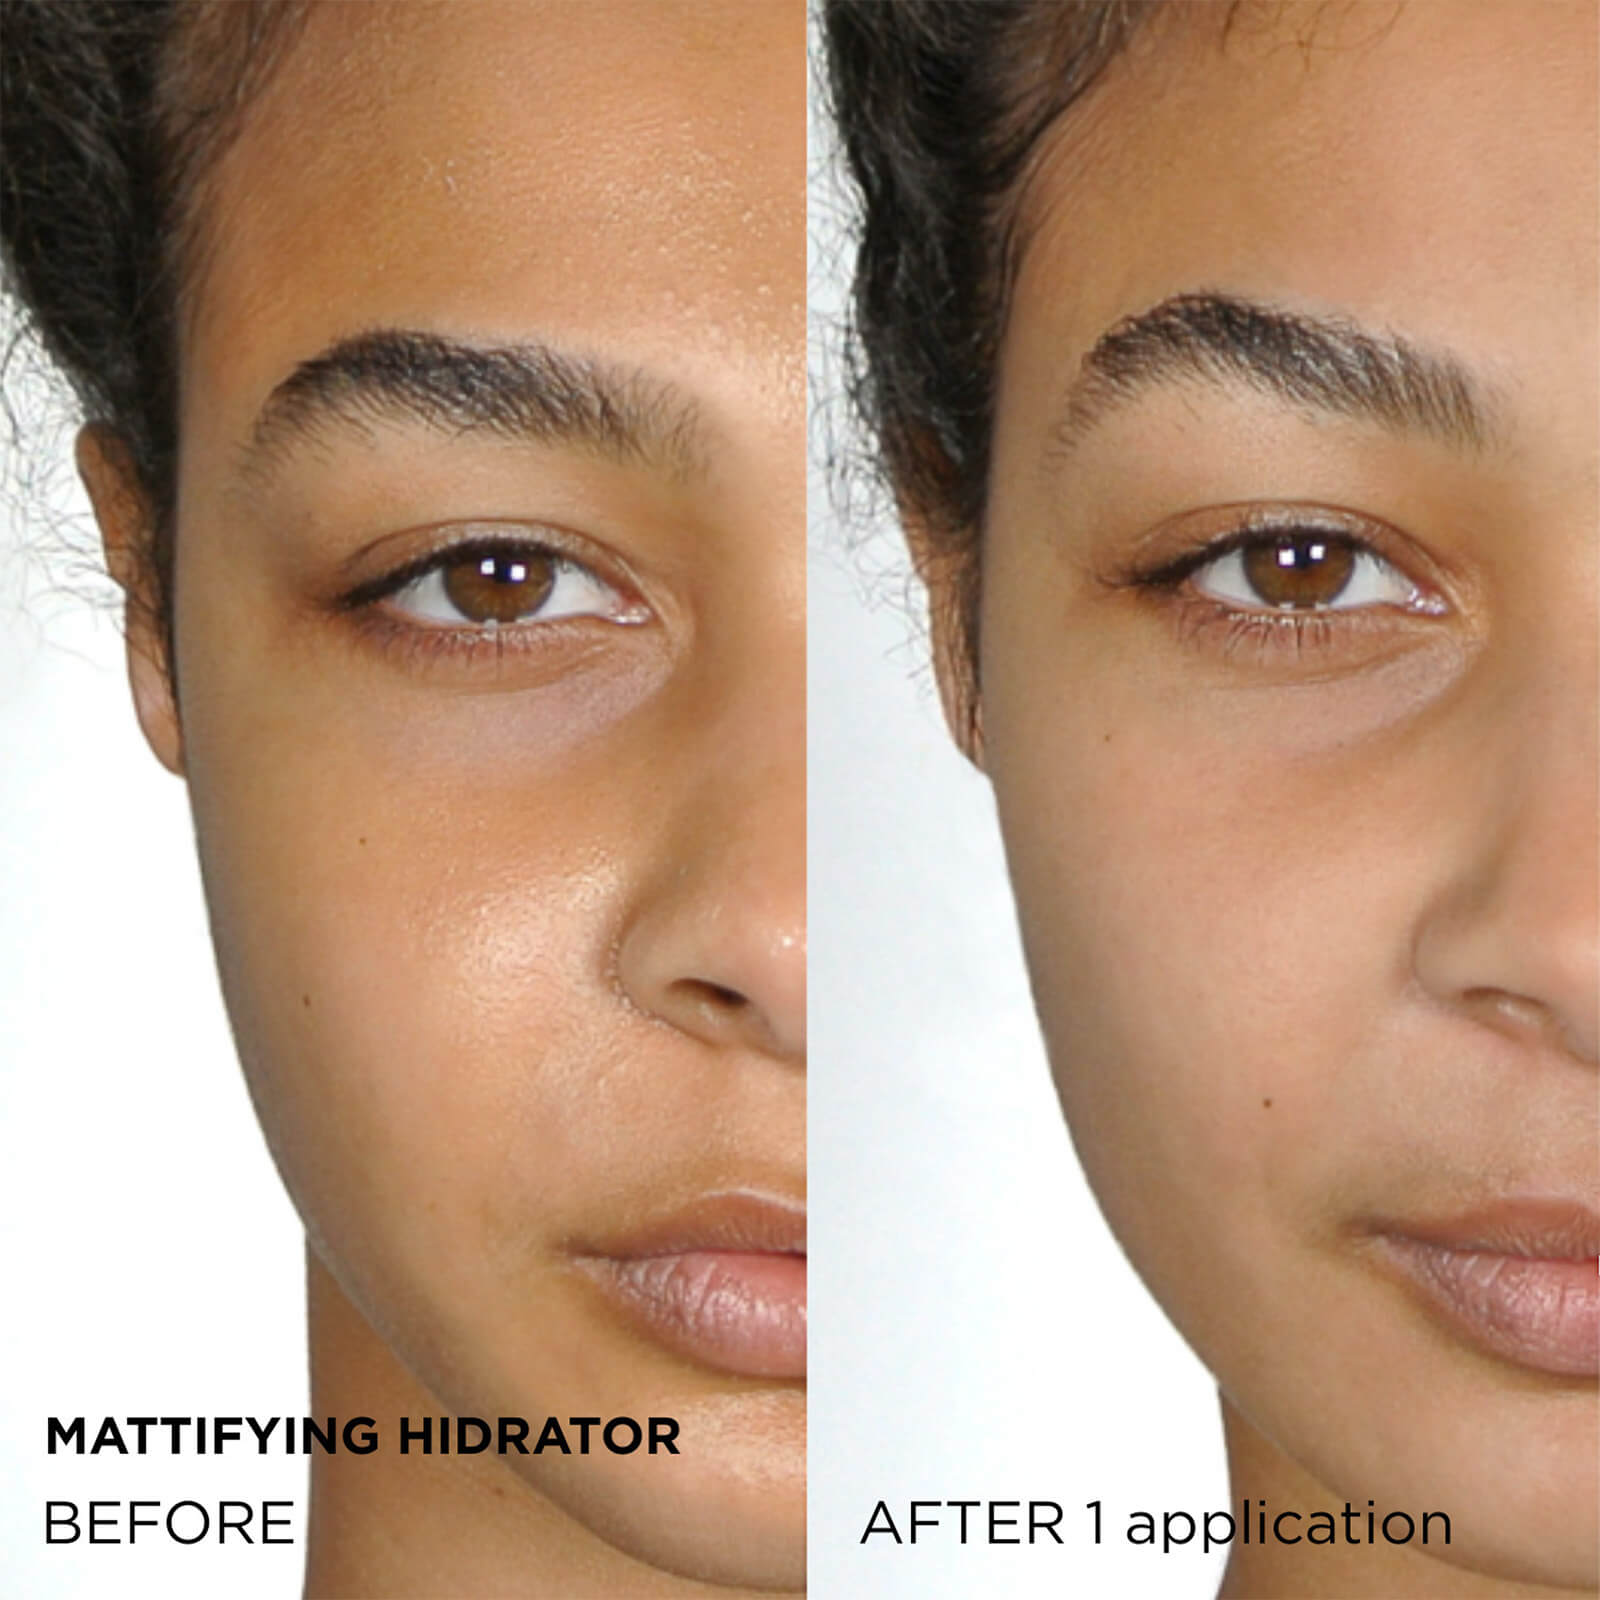 mattifying hidrator before, after 1 application